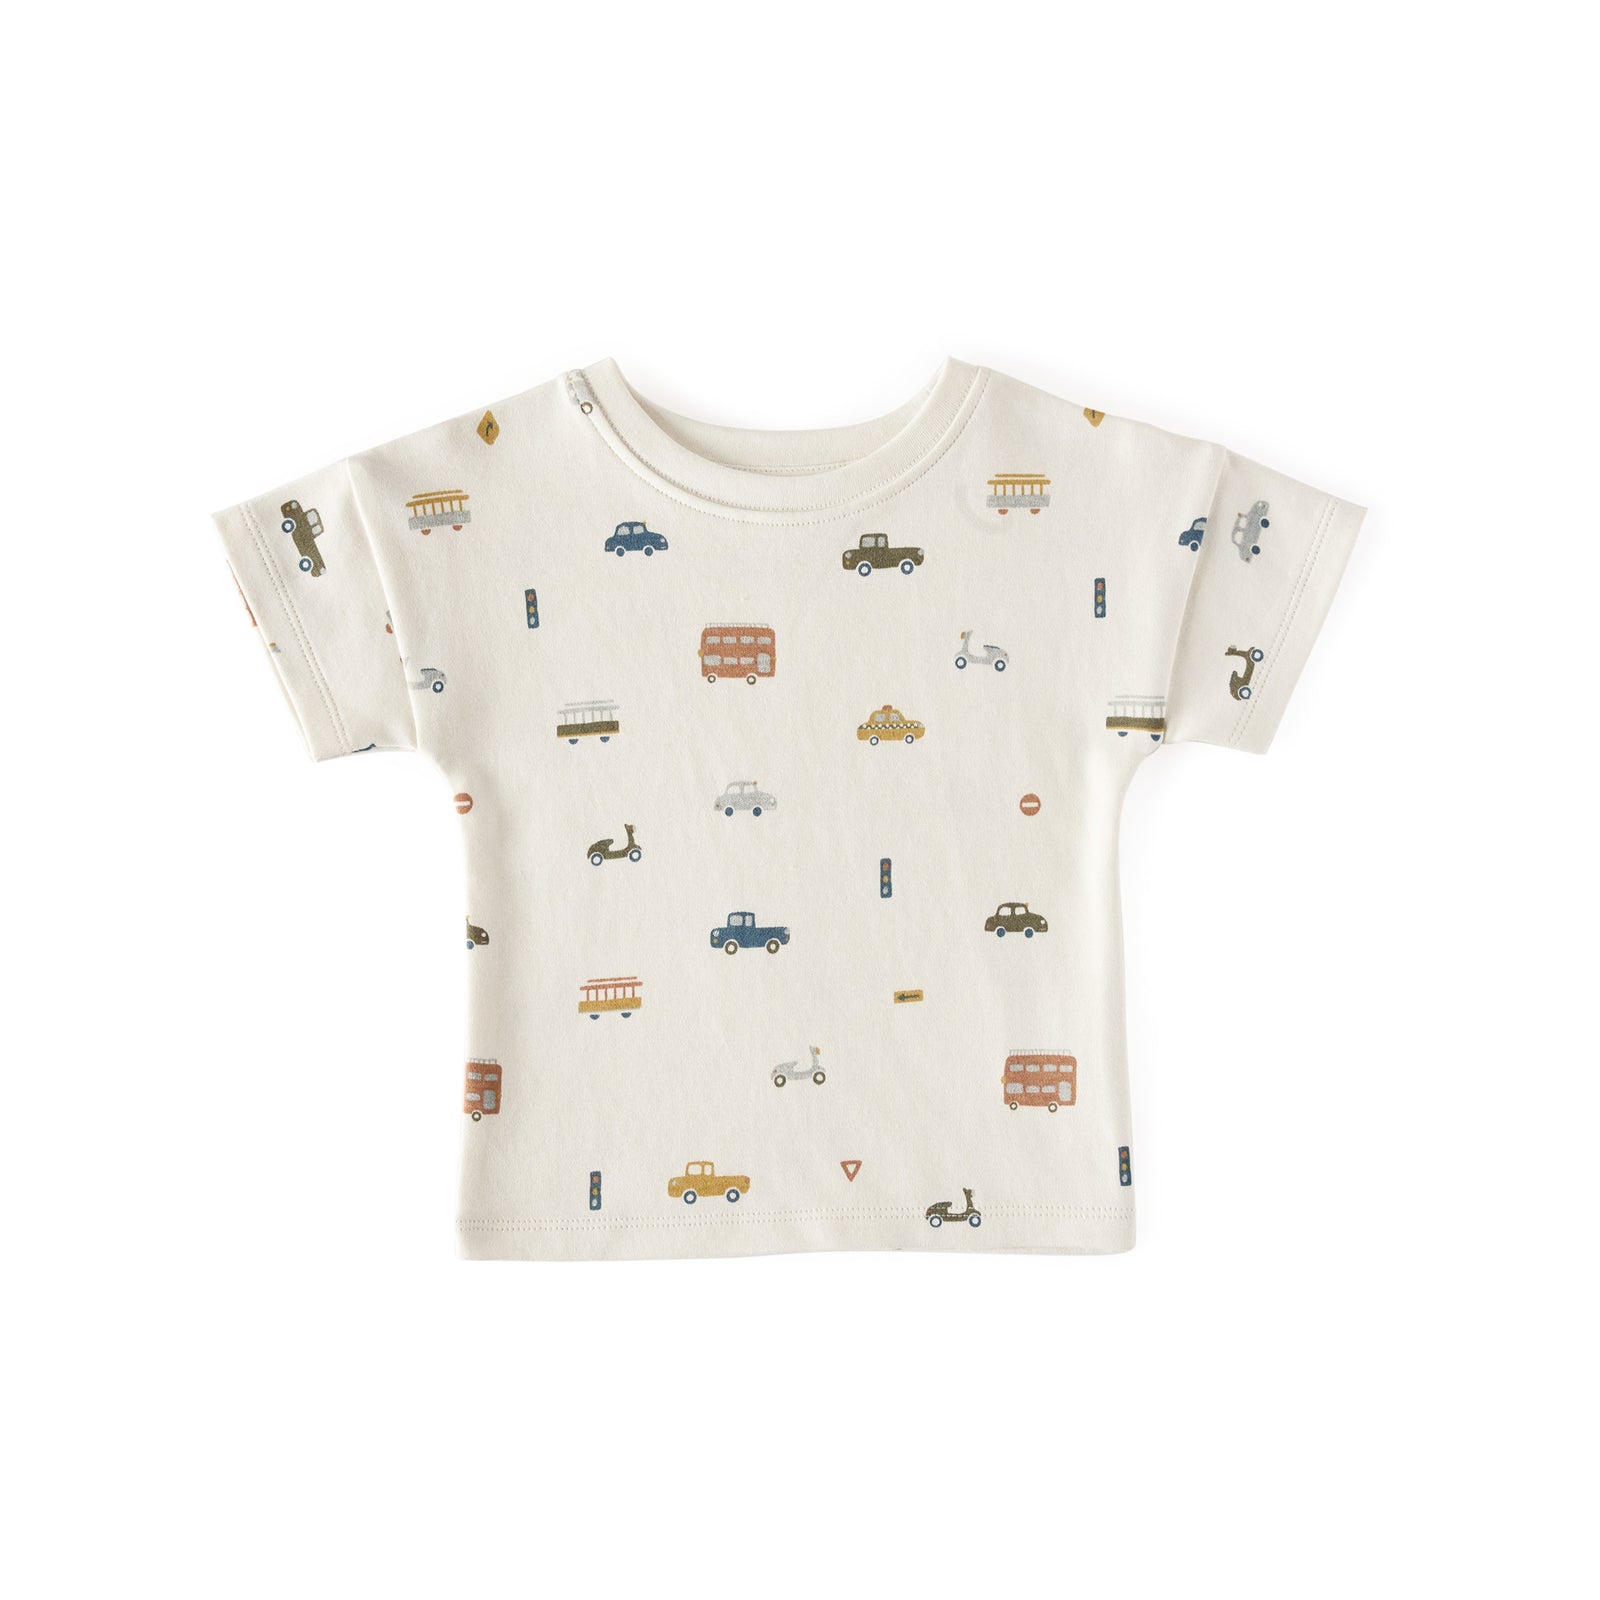 Dropped Shoulder T-Shirt Top Pehr Canada Rush Hour 18 - 24 mos. 